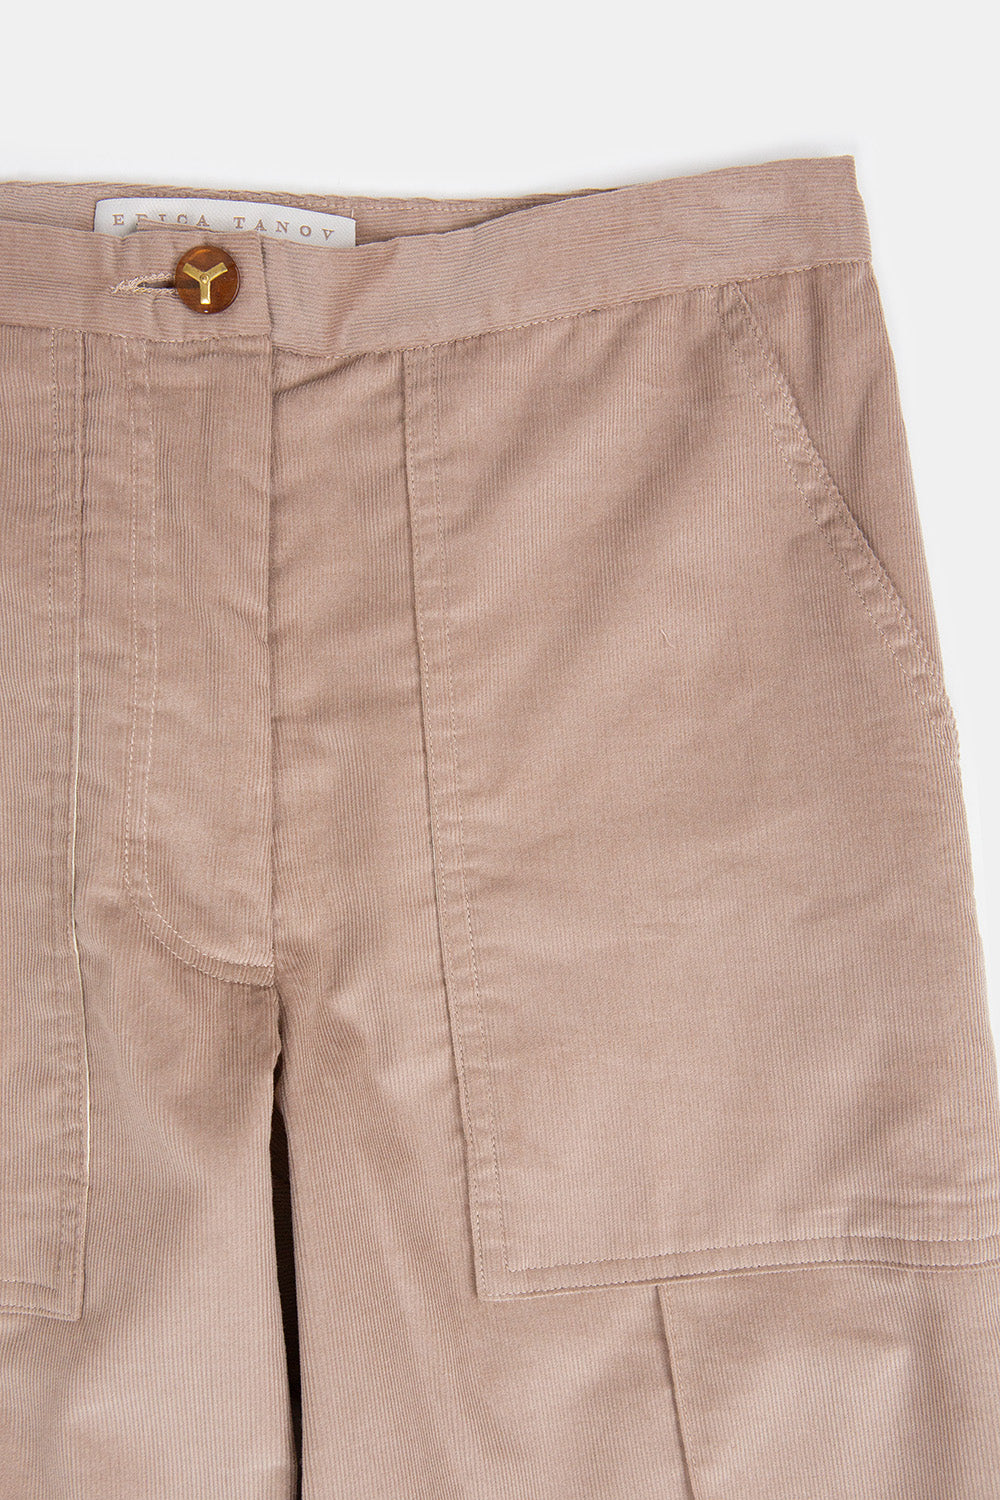 Darby Cotton Corduroy Pants In Sand